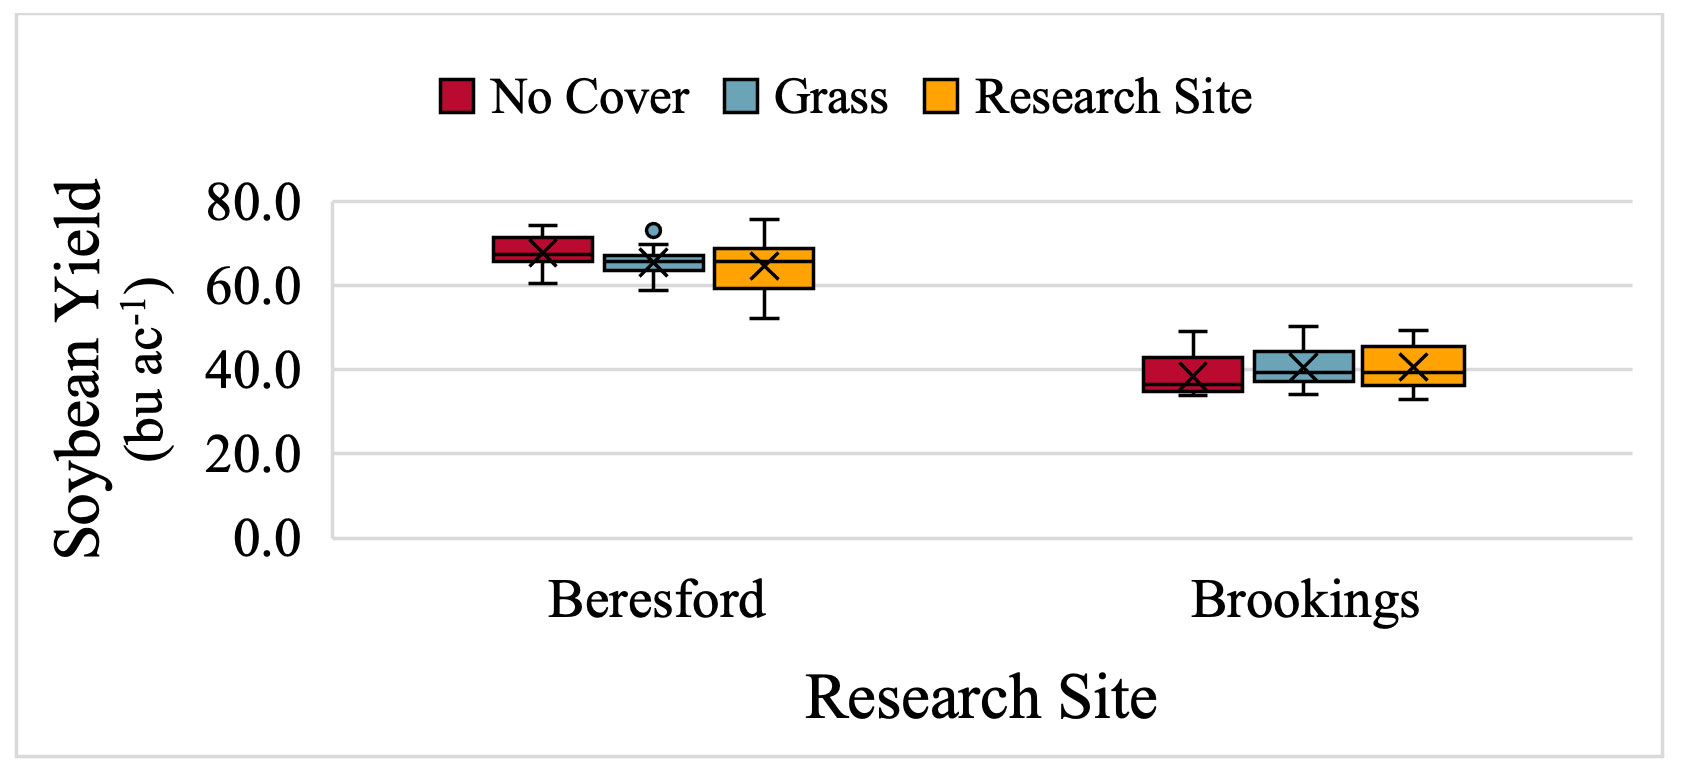 A scatter plot chart showing soybean yield response to cover crop treatments in Beresford and Brookings. The left chart is labeled "Beresford". For a complete description of the data, call SDSU Extension at 605-688-6729.